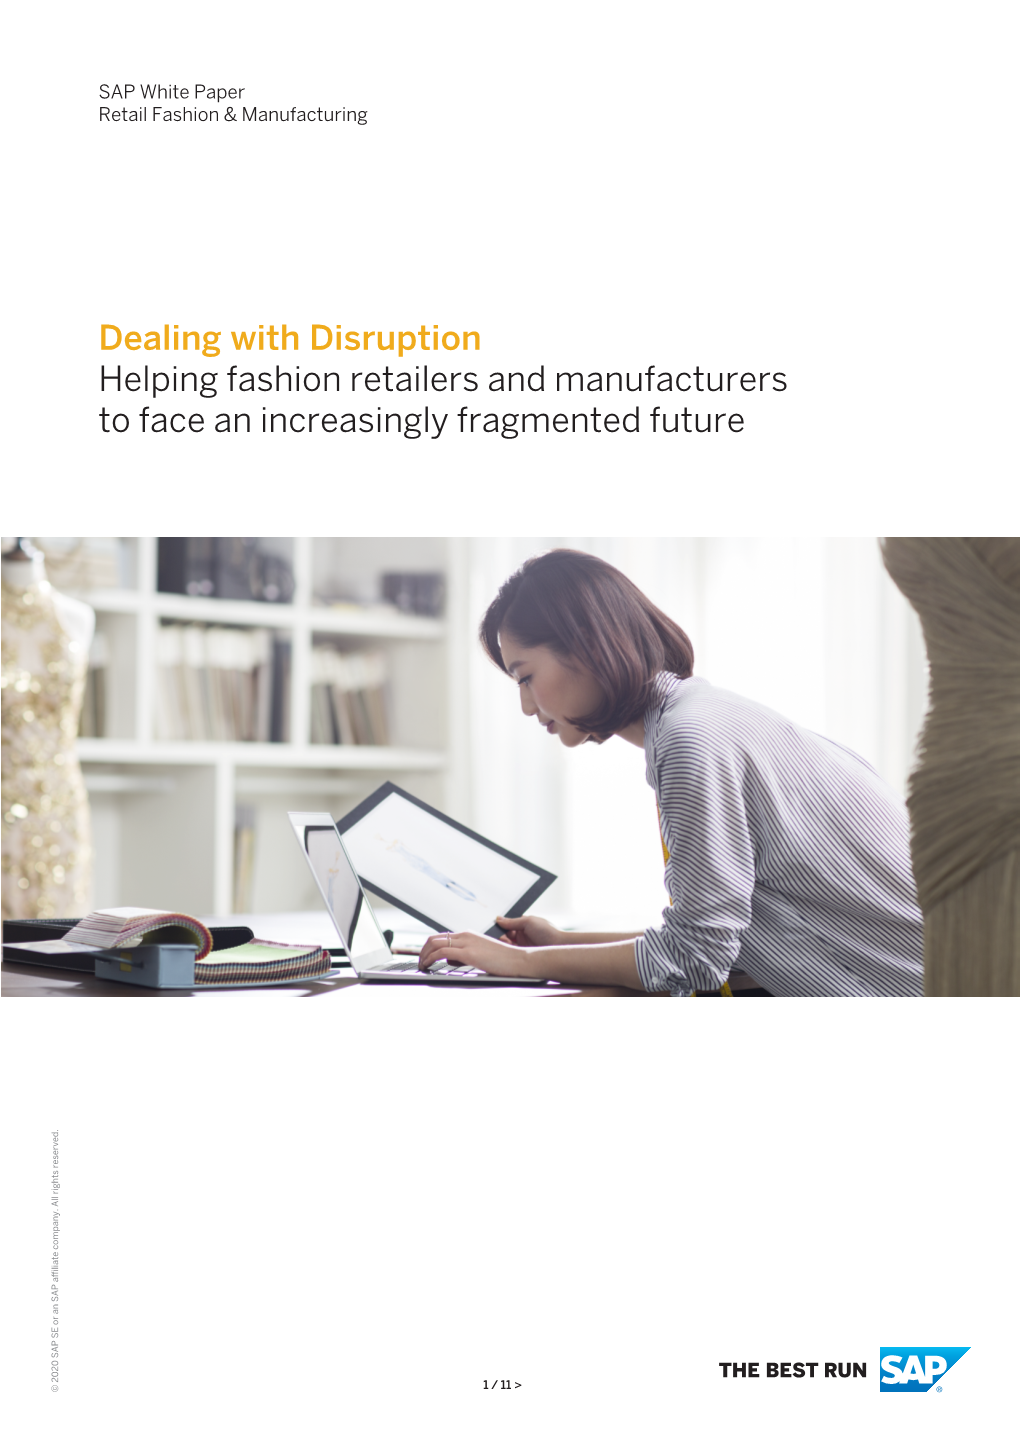 Dealing with Disruption Helping Fashion Retailers and Manufacturers to Face an Increasingly Fragmented Future